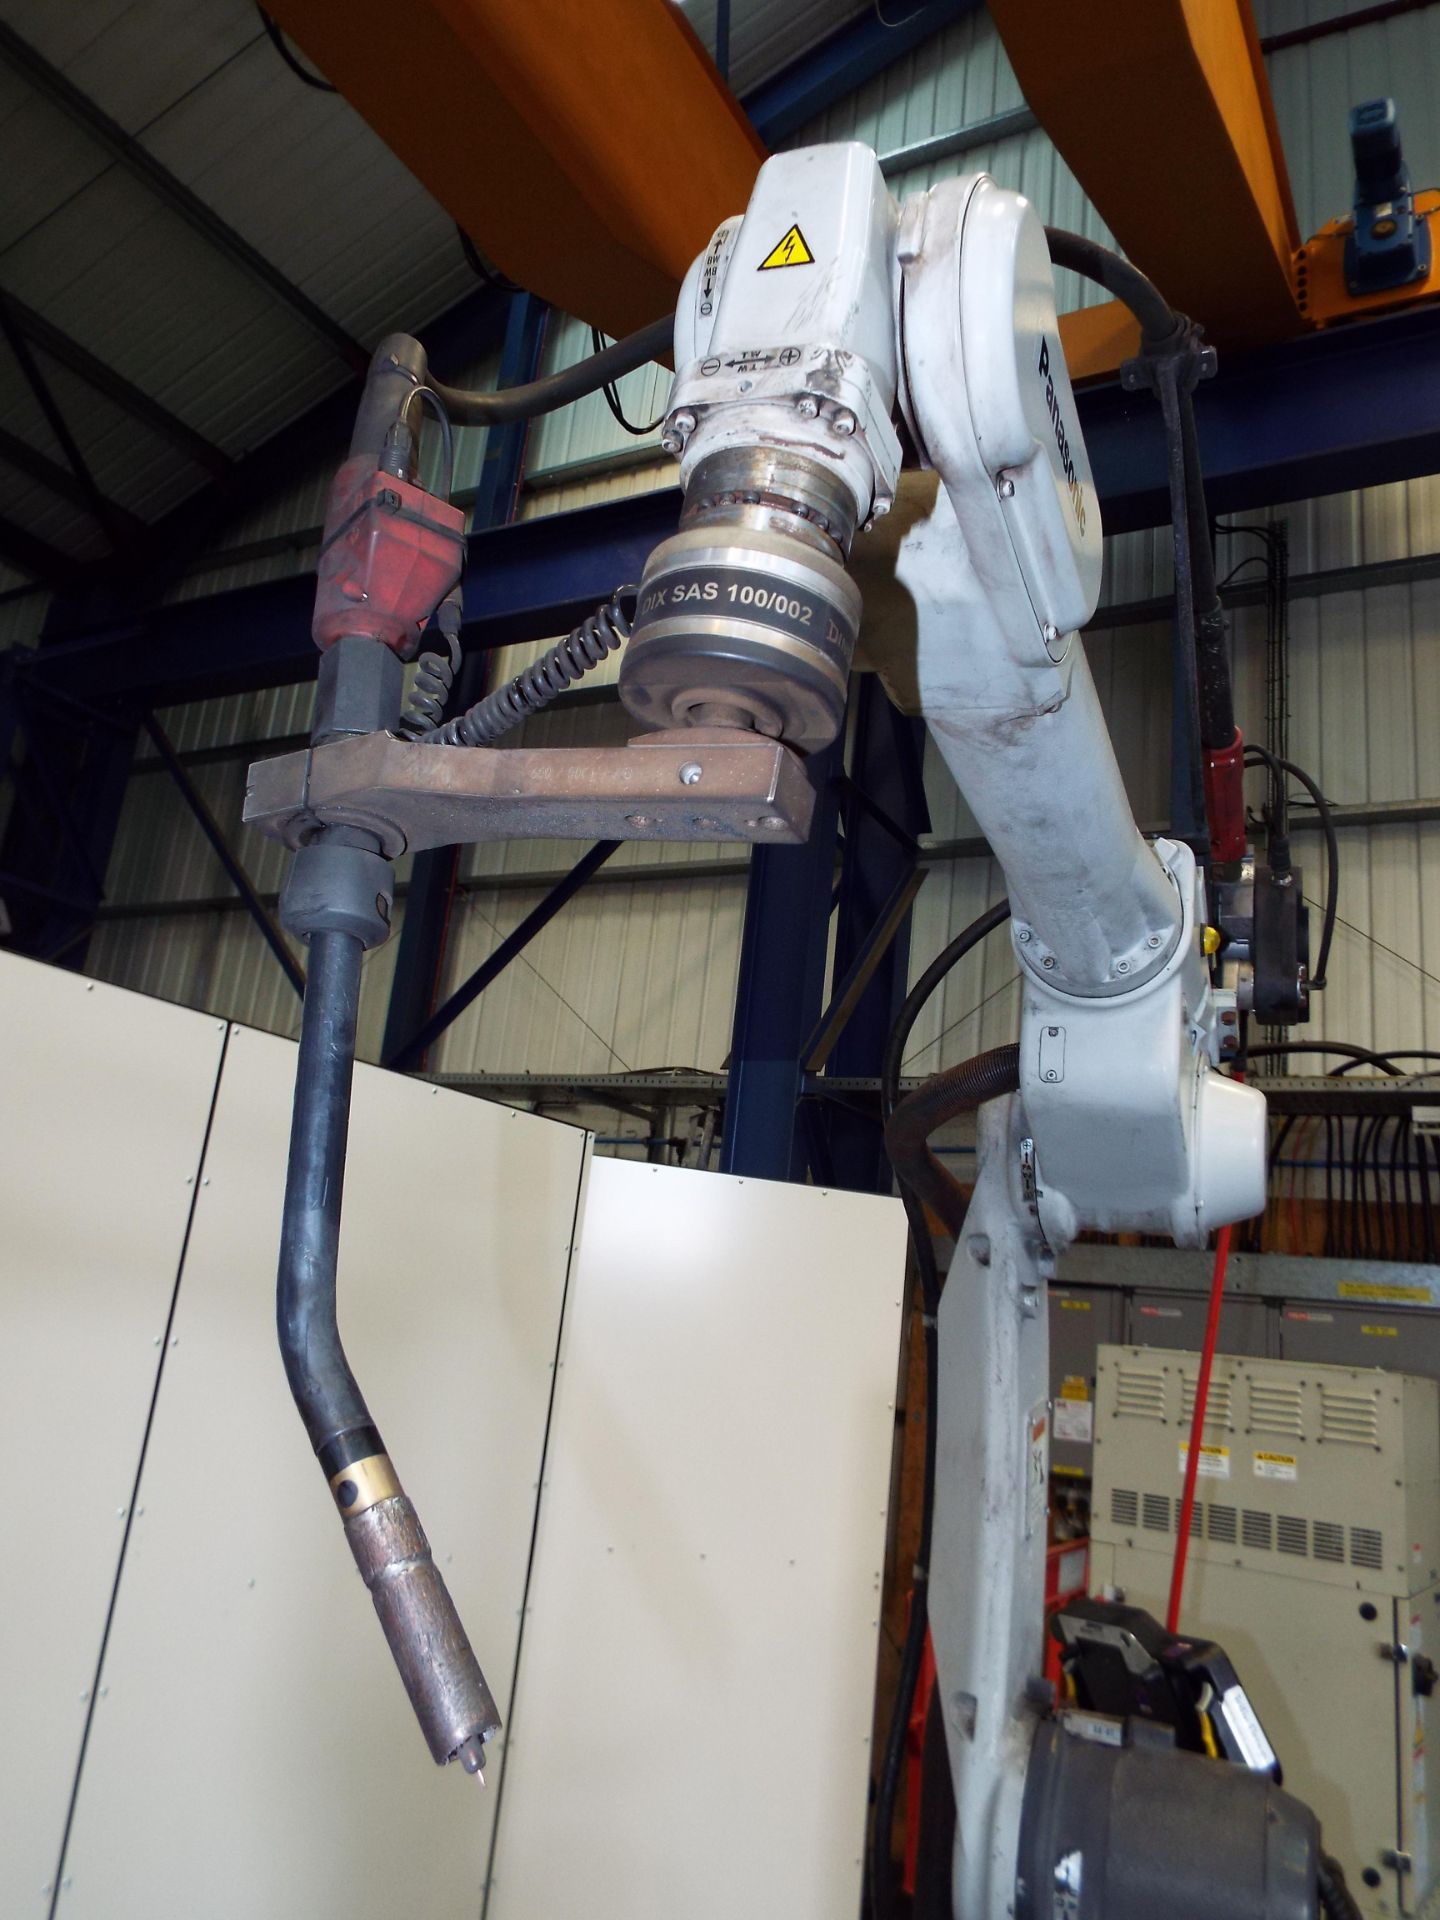 Panasonic TA1800 MIG Welding Robot cw Power Source,Transformer & 7th Axis Rotating Positioner - Image 4 of 10